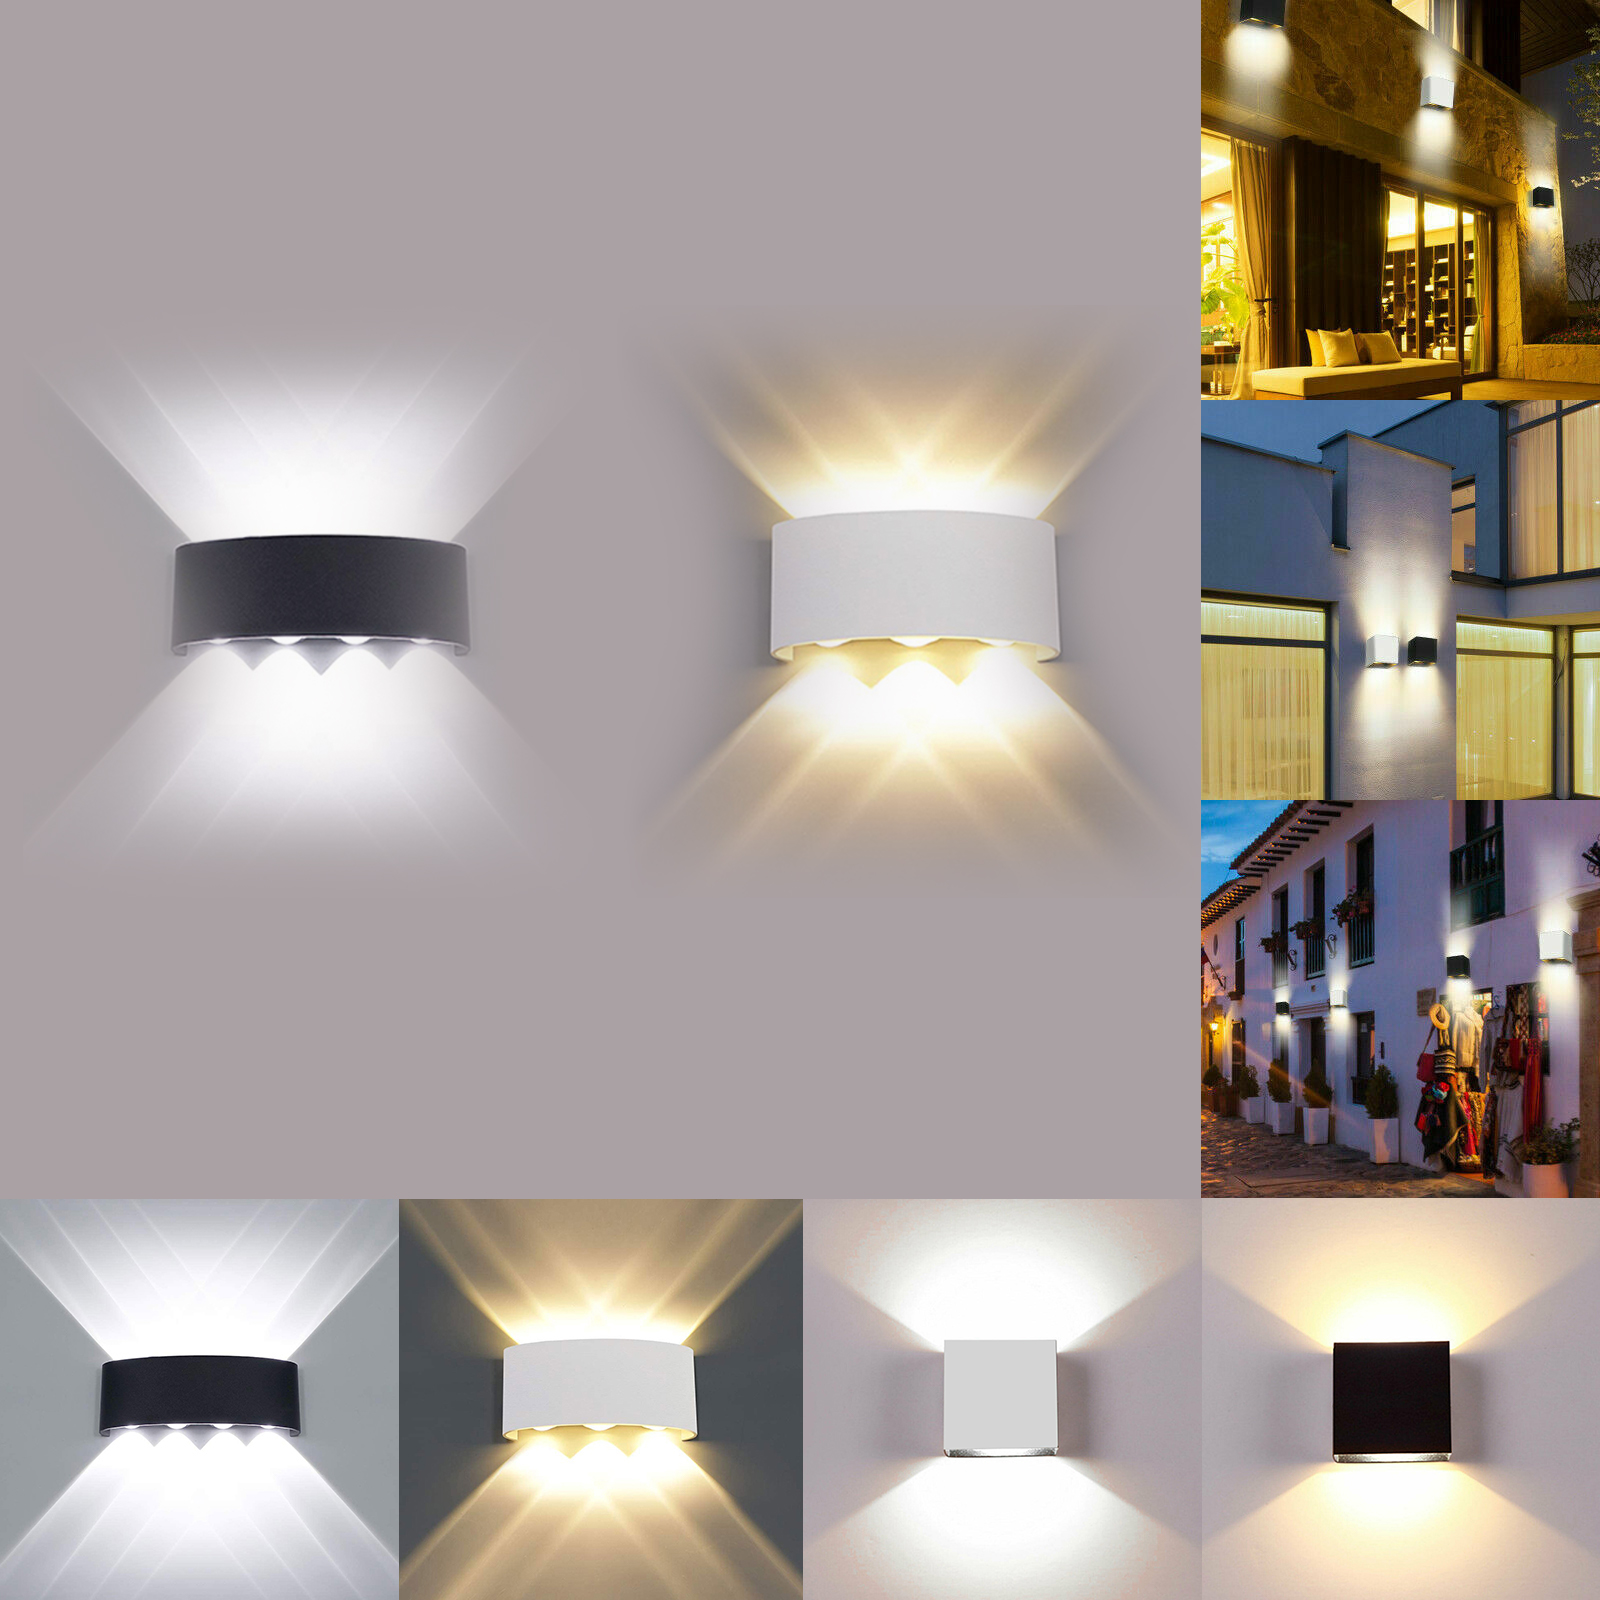 1/2/4PCS Cube LED Wall Lights Modern Up Down Sconce Lighting Lamp Indoor Outdoor